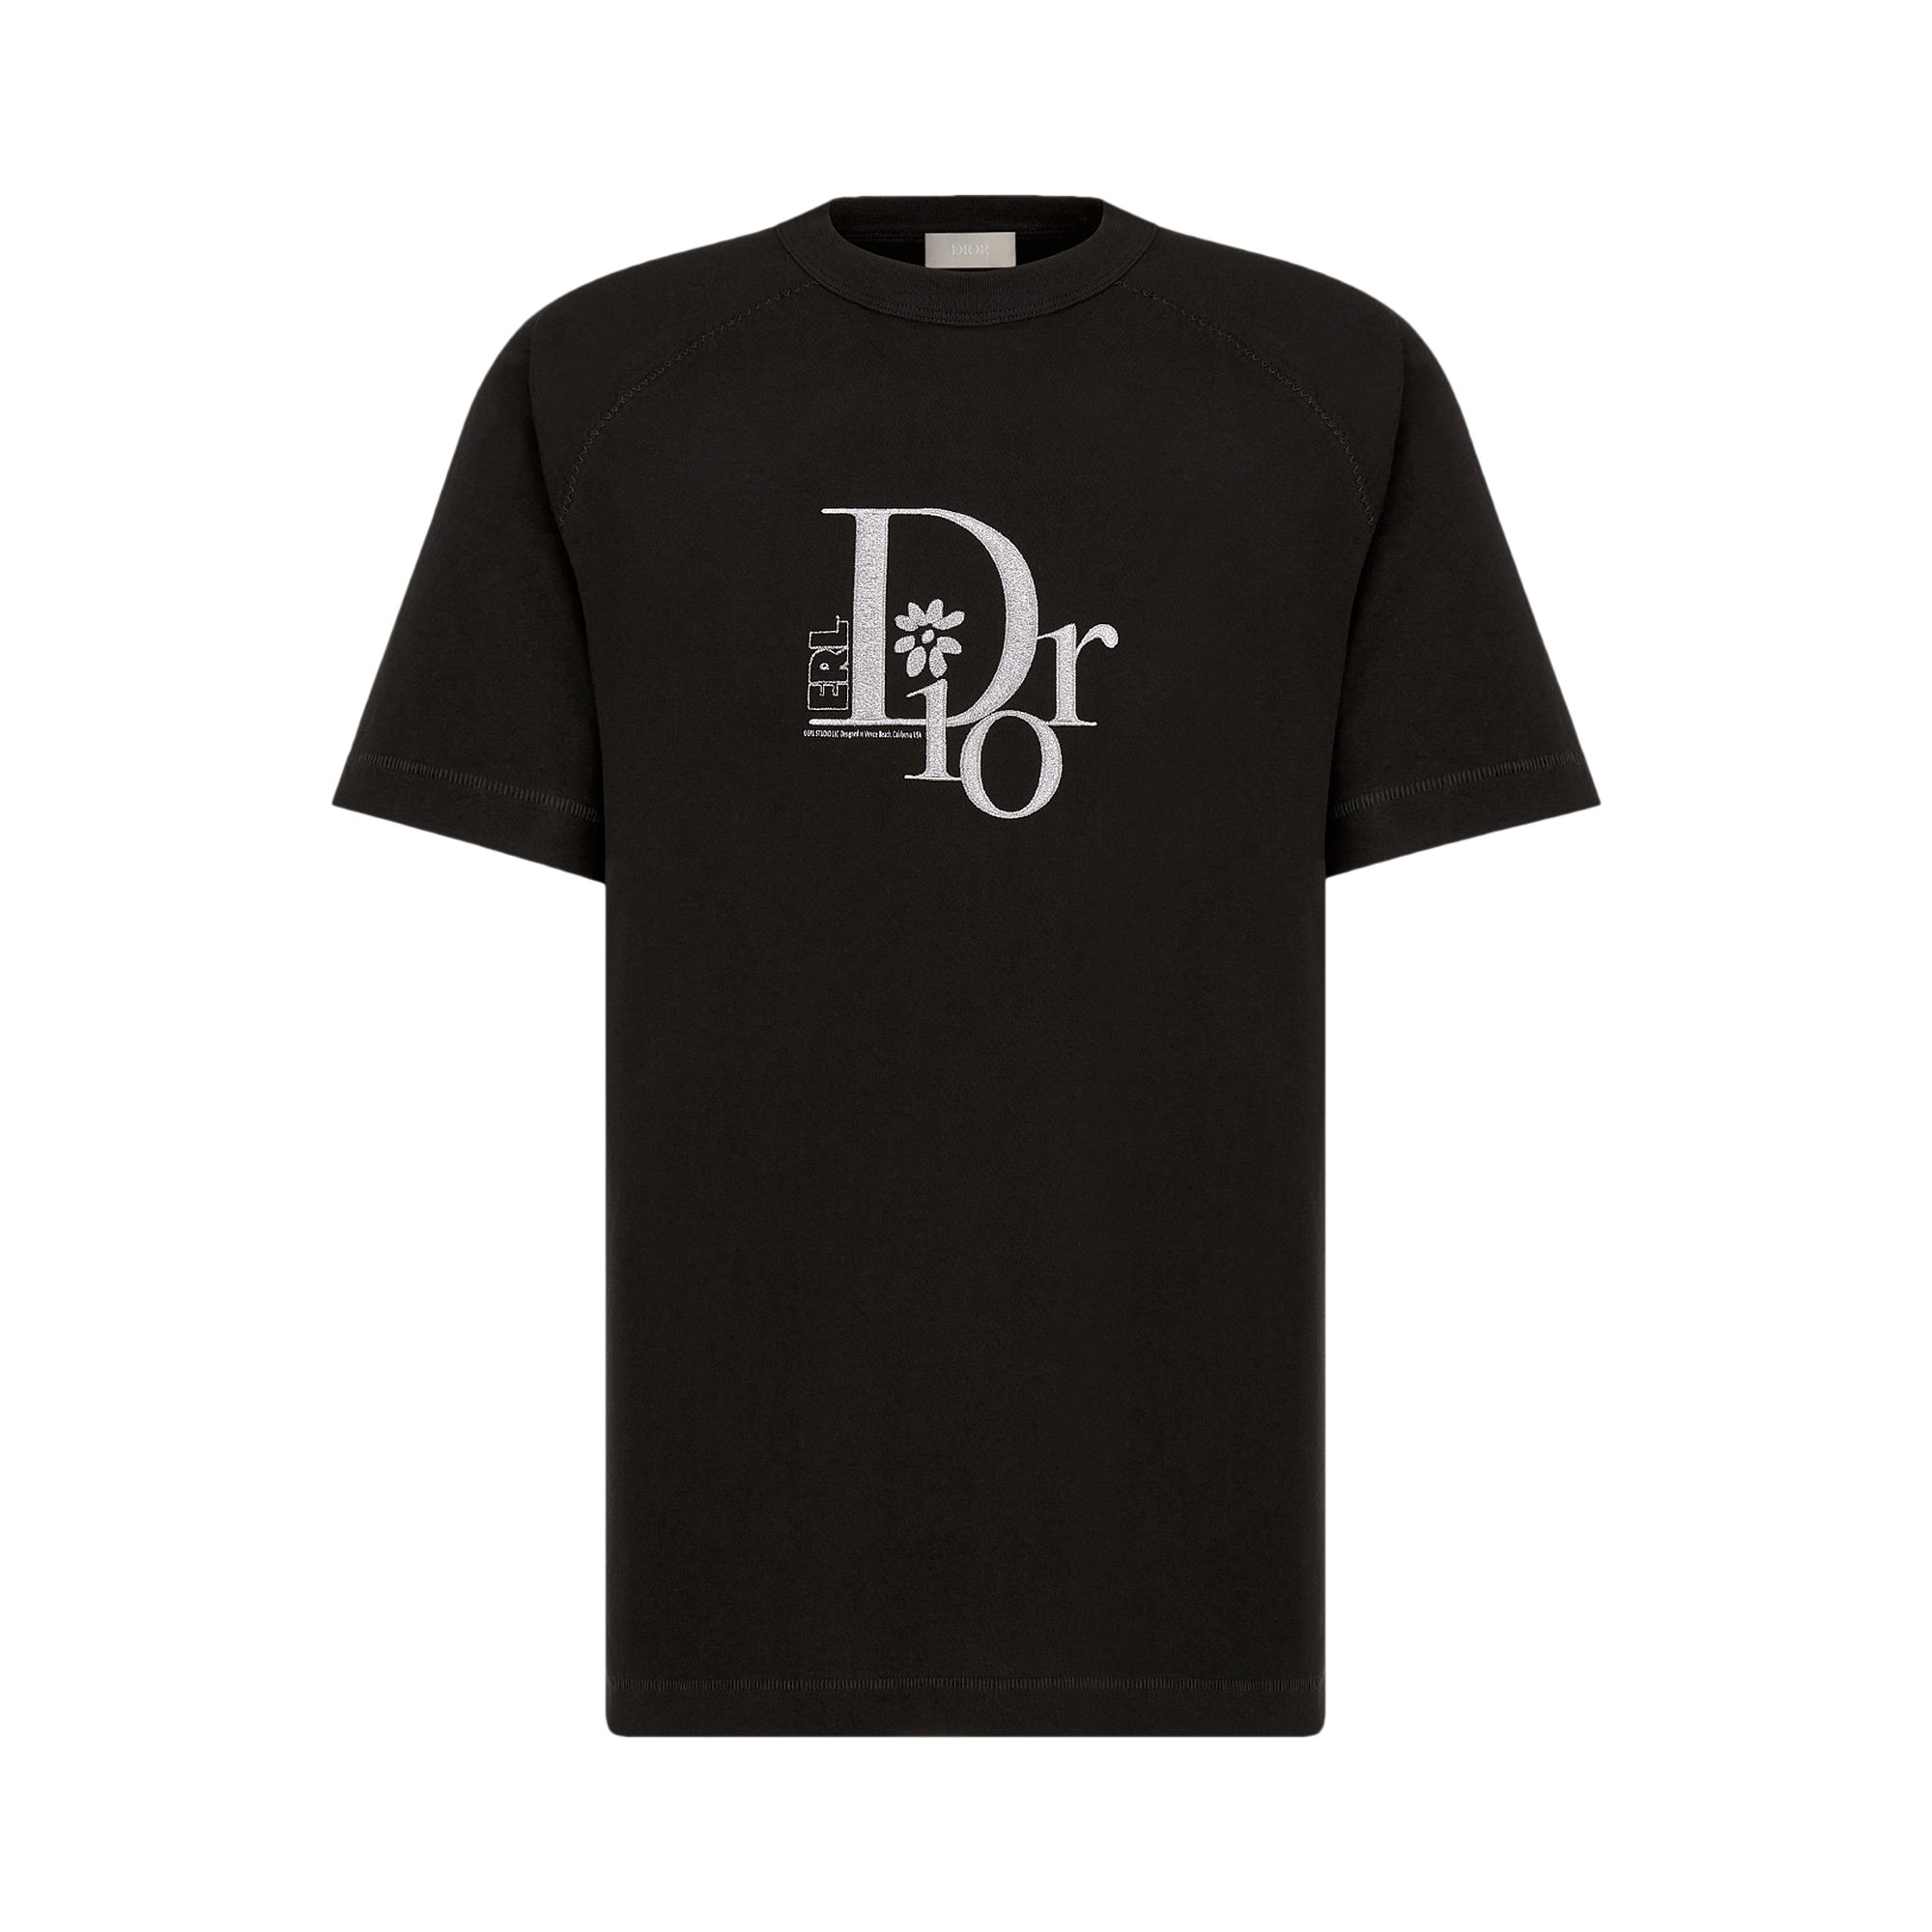 Buy Dior x ERL Relaxed-Fit T-Shirt 'Black' - 313J647A0817 C980 | GOAT